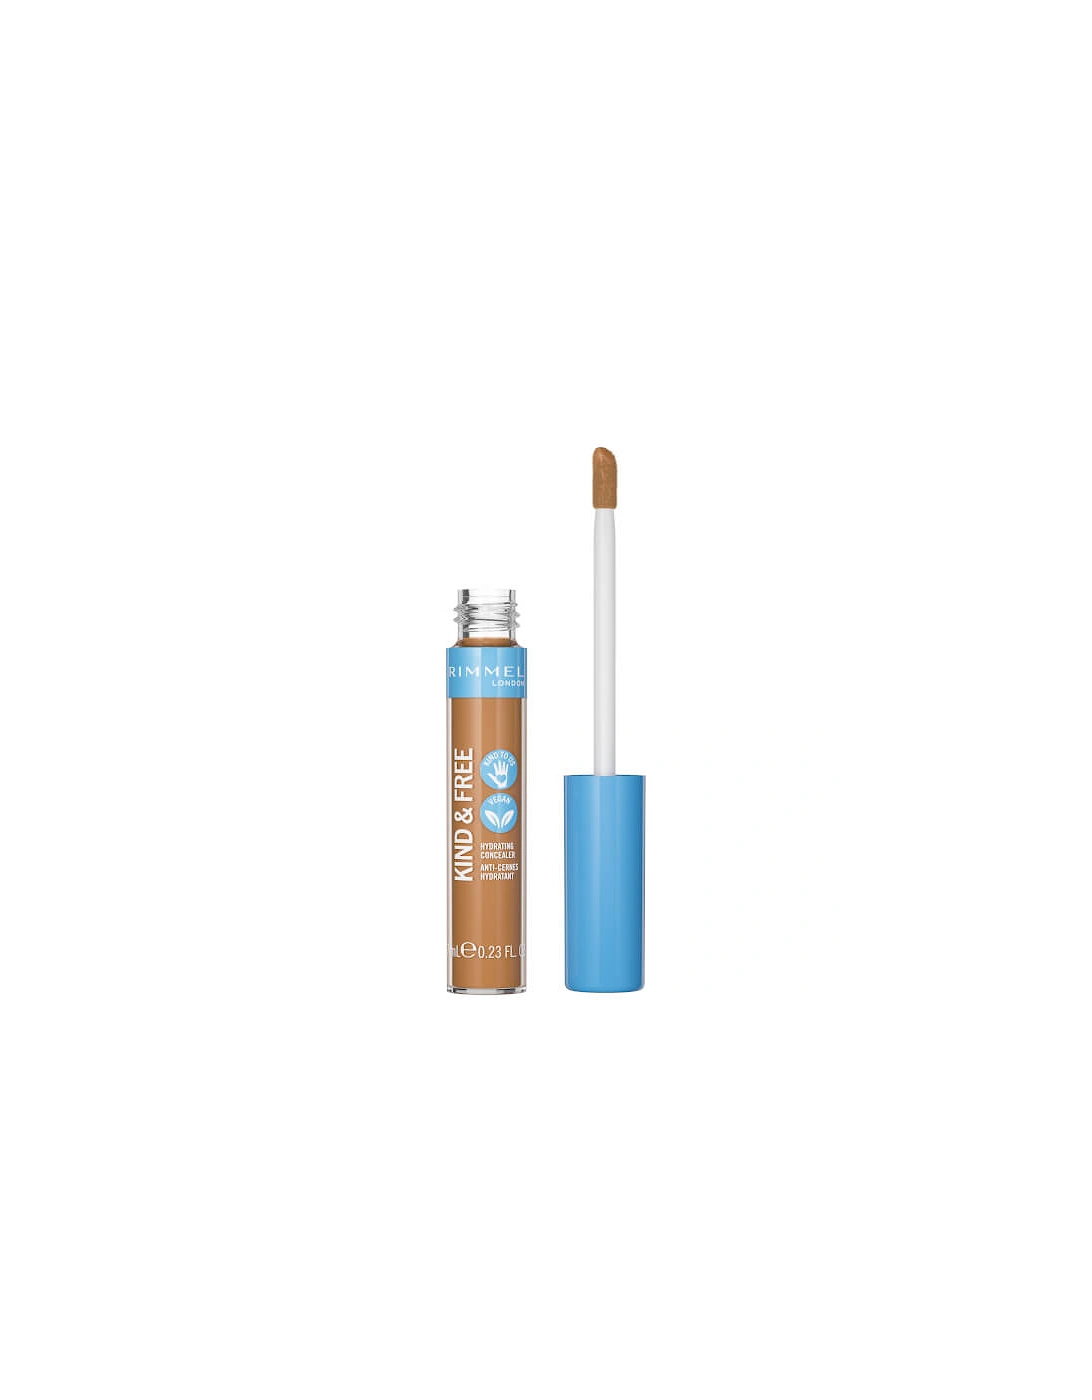 Kind and Free Hydrating Concealer - Tan, 2 of 1